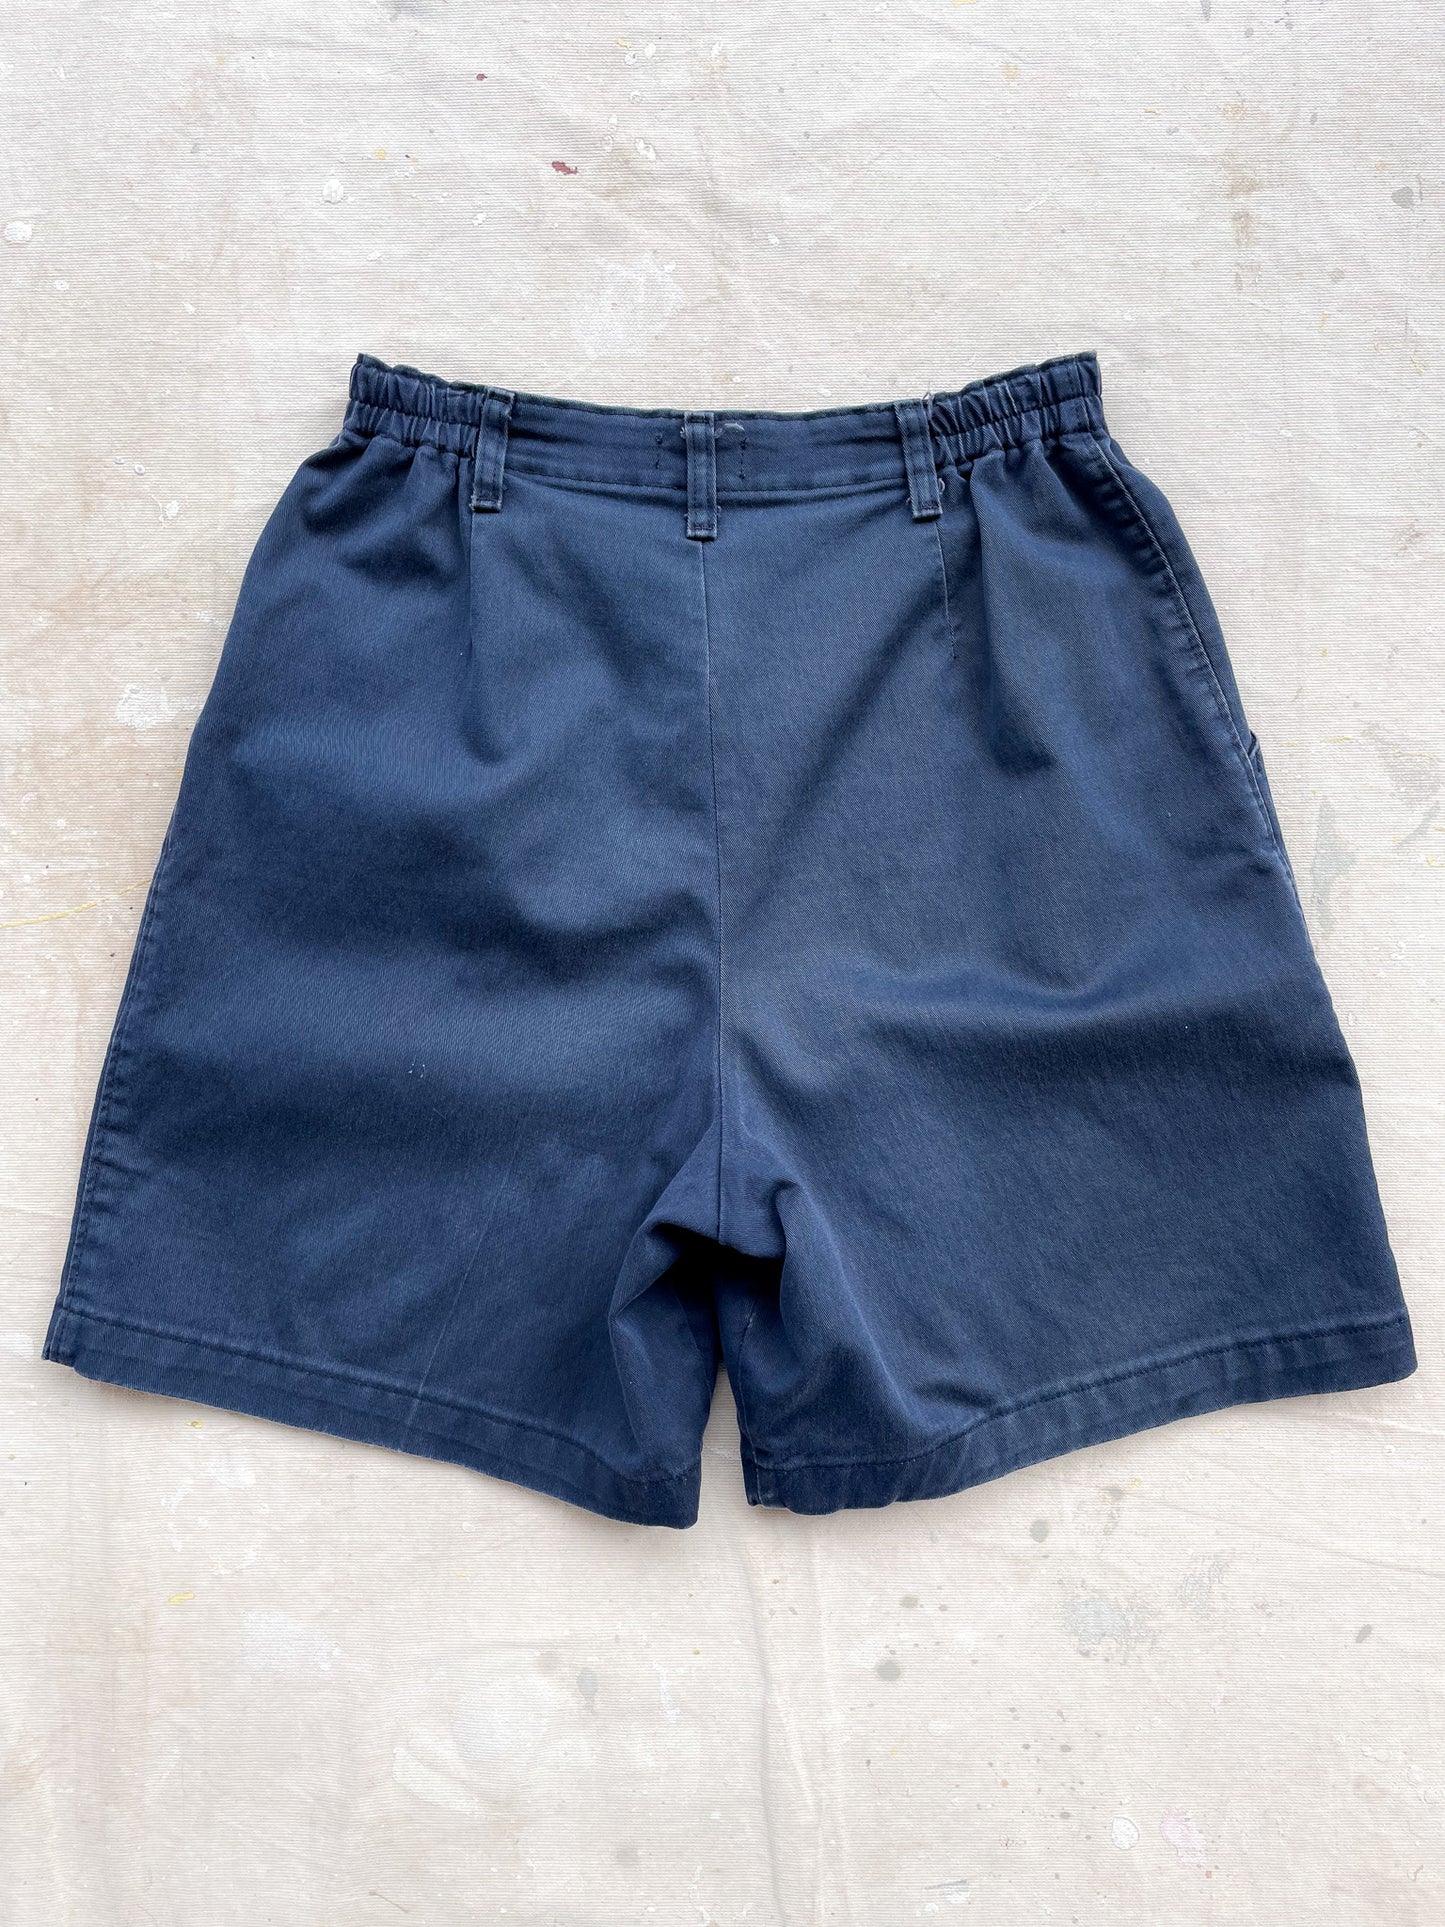 Lee Pleated Shorts—[26]